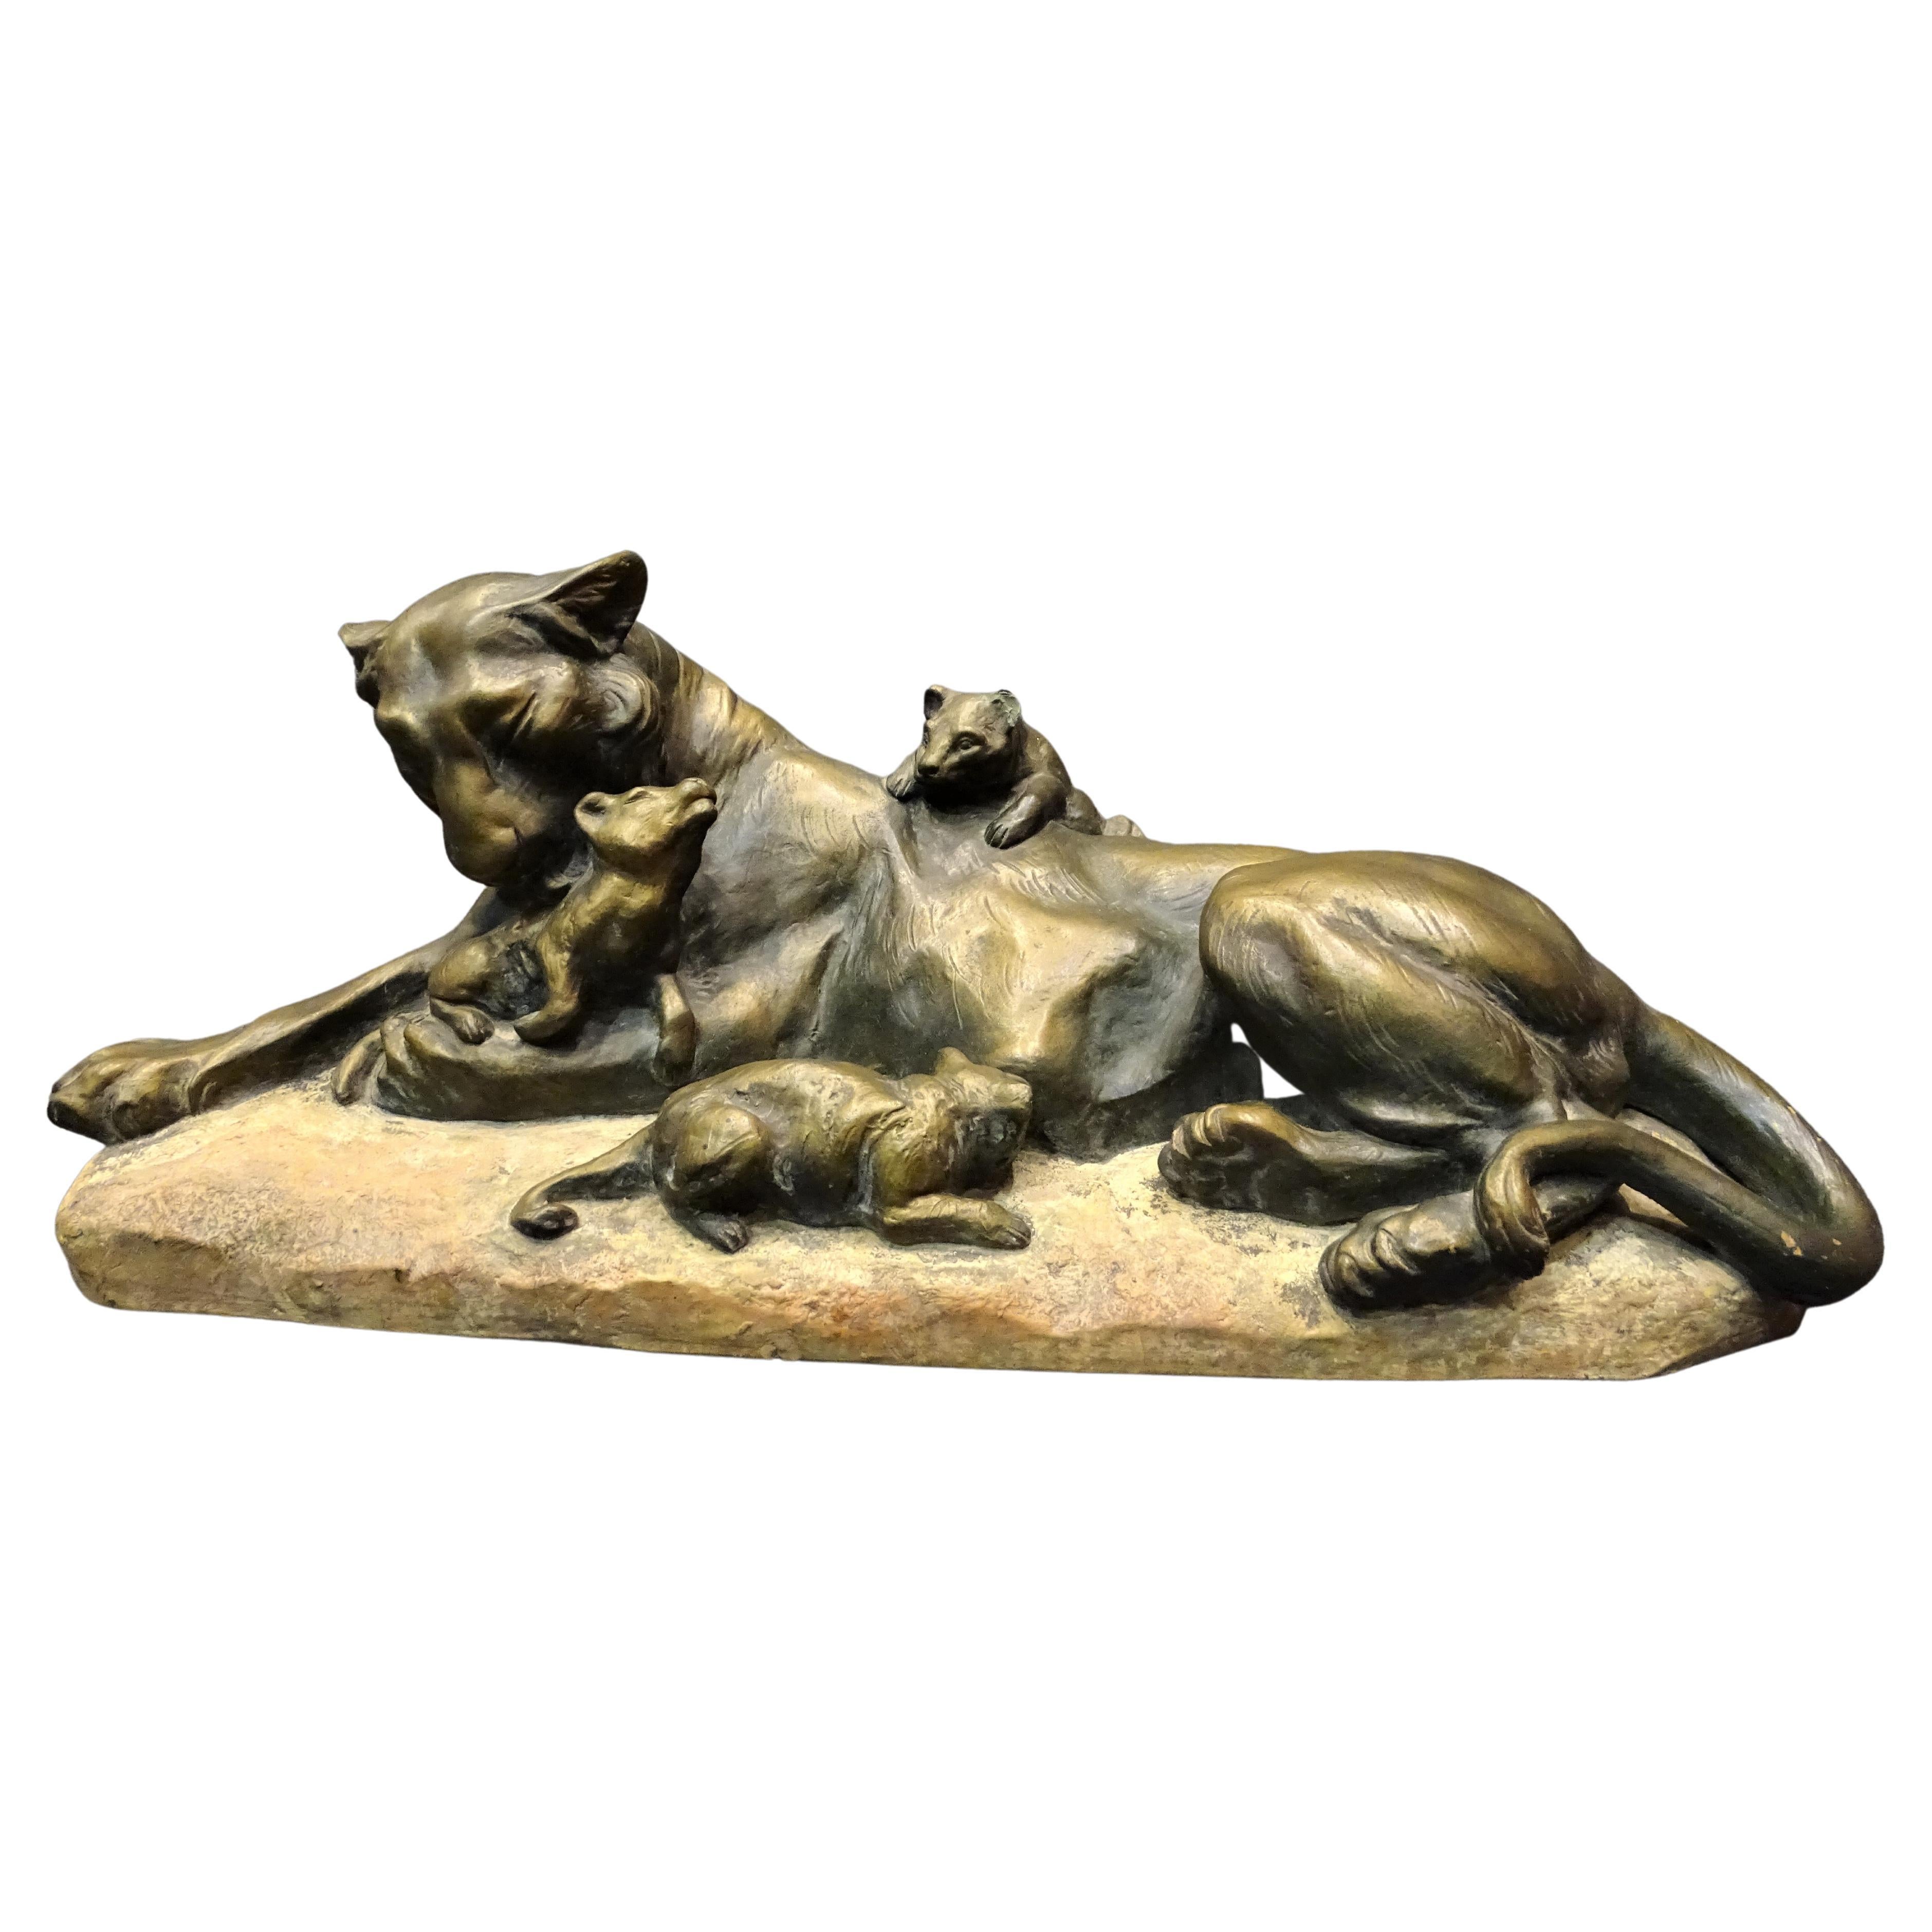 Art Nouveau Italian Scupture Terracotta, Lioness with Her Lions, A Amorgasti